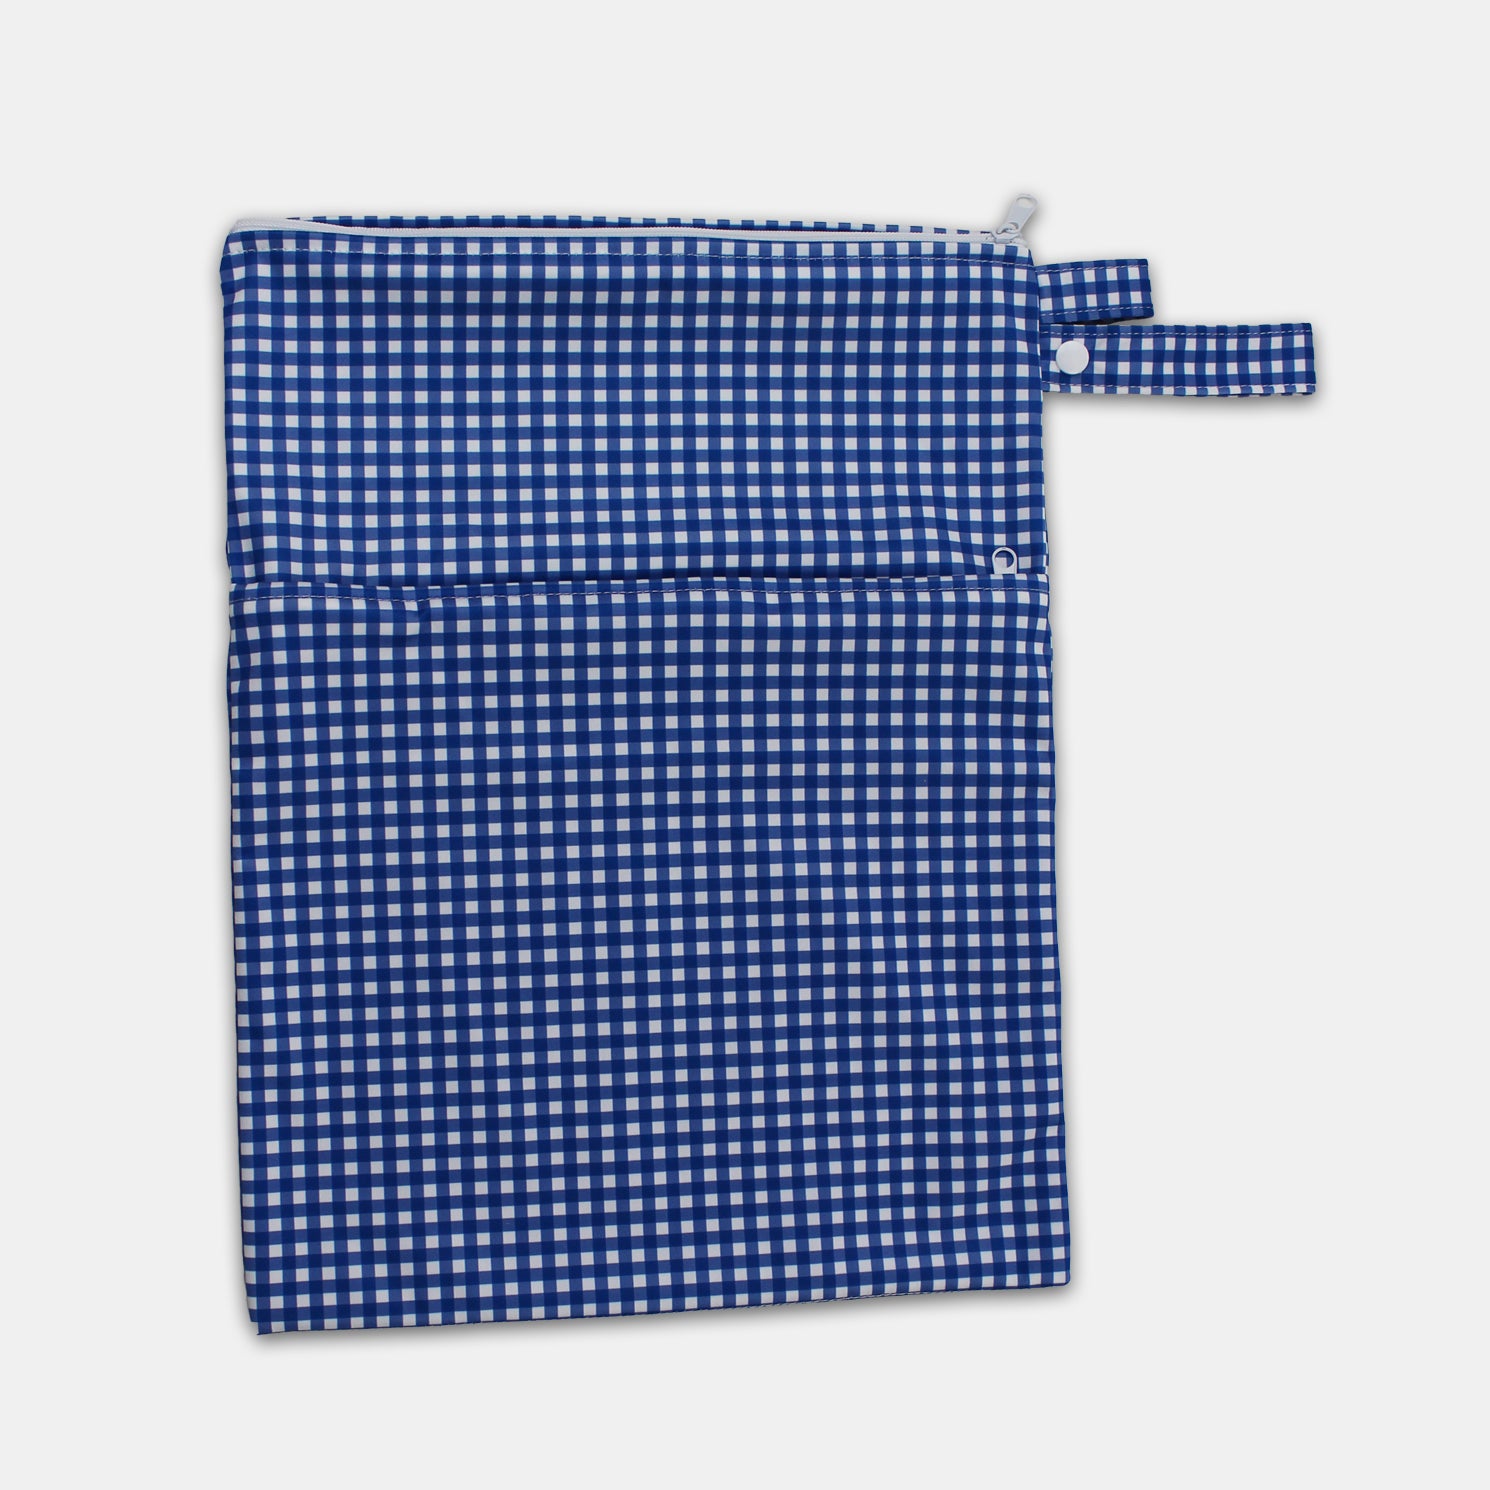 Tyoub Waterproof Stay-dry Zip Wet Bag– Blue White Gingham Check Measures 30 x 40 cm. Large front zipped pocket to separate items. Main pouch with zipper to keep wet and dry things separate. Each pocket is waterproofed and zipped. Lightweight and easy to pack and carry.Come with a handy strap for easy carrying or hooking to your nappy bag or stroller.